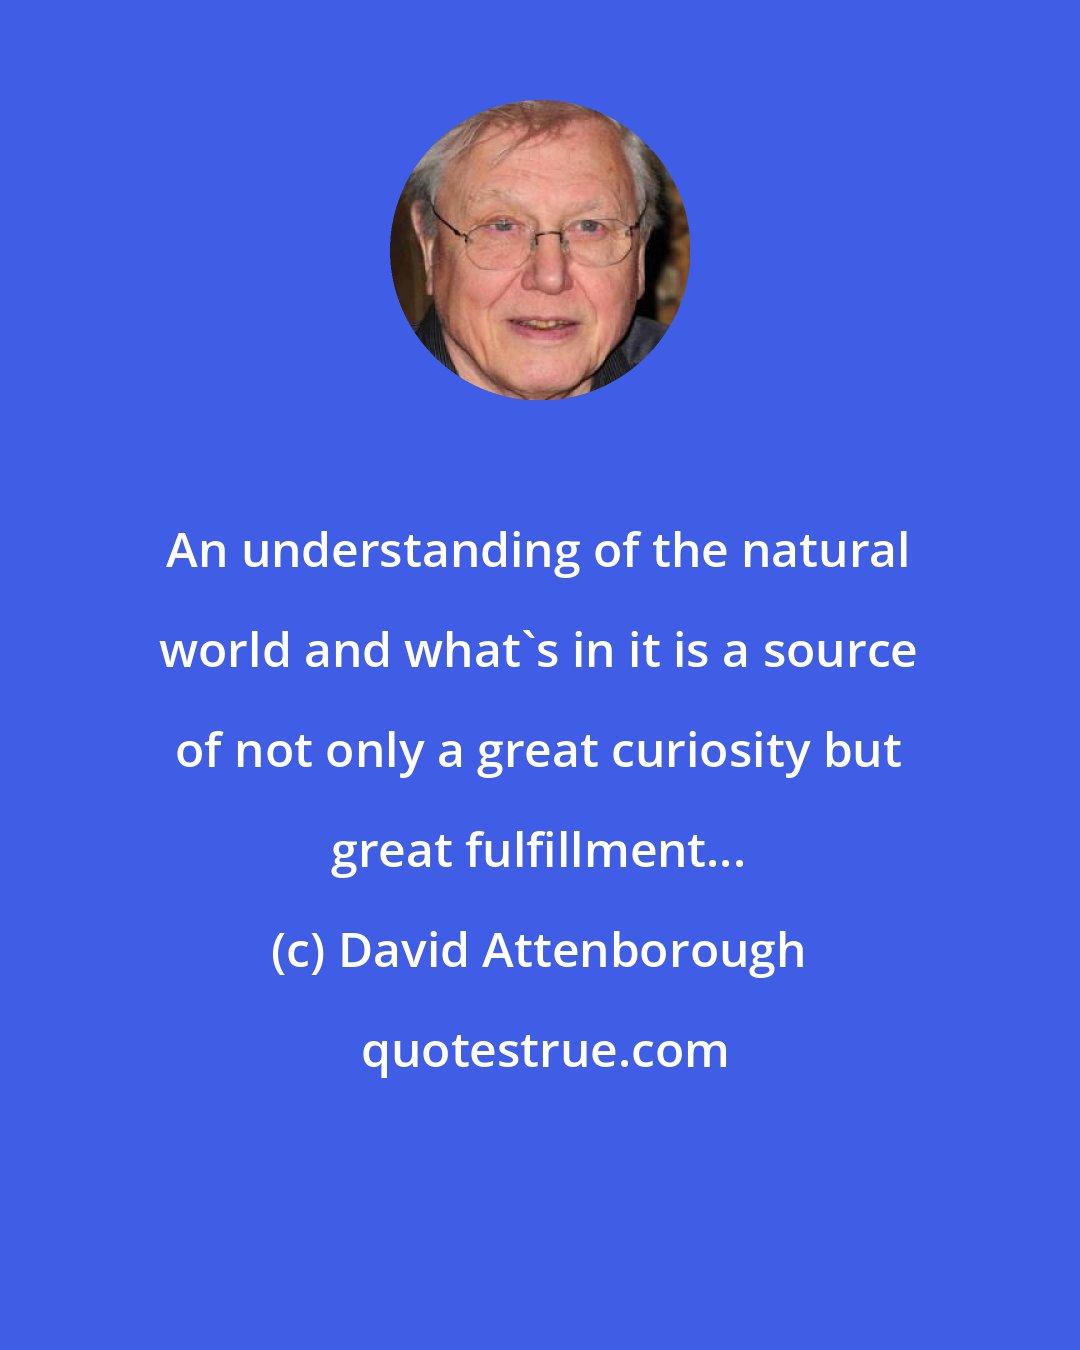 David Attenborough: An understanding of the natural world and what's in it is a source of not only a great curiosity but great fulfillment...